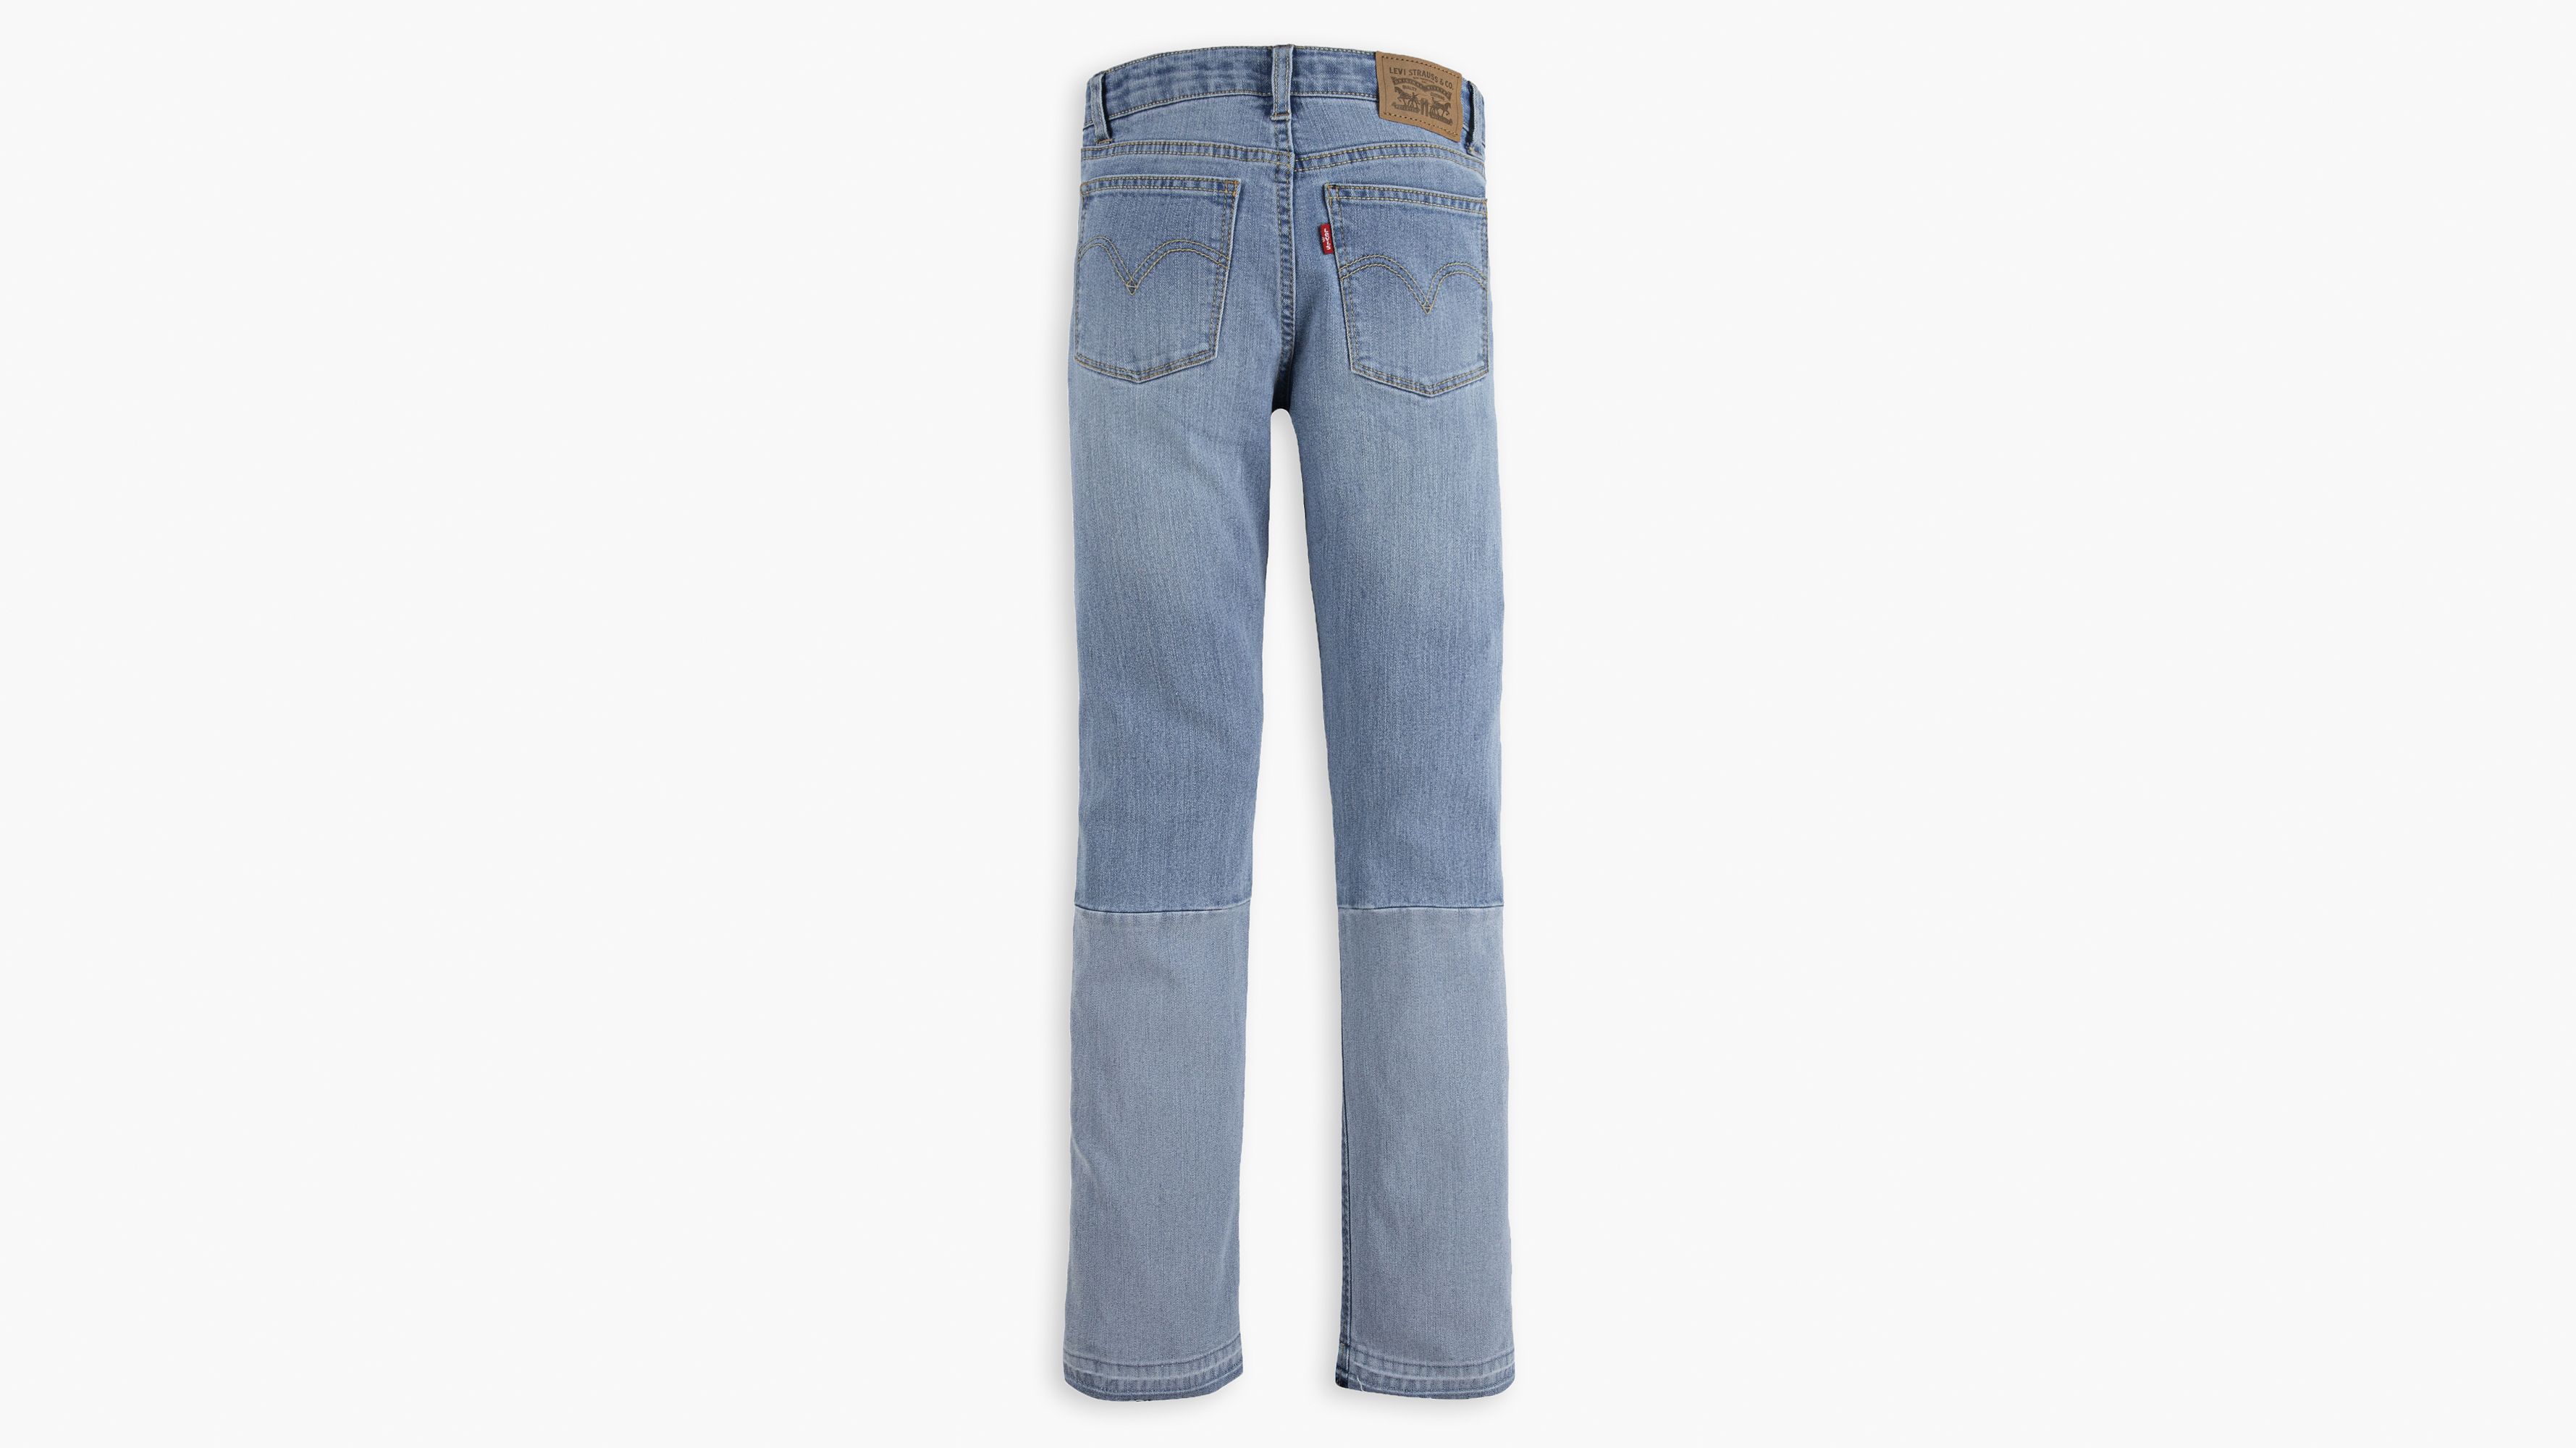 4t jeans